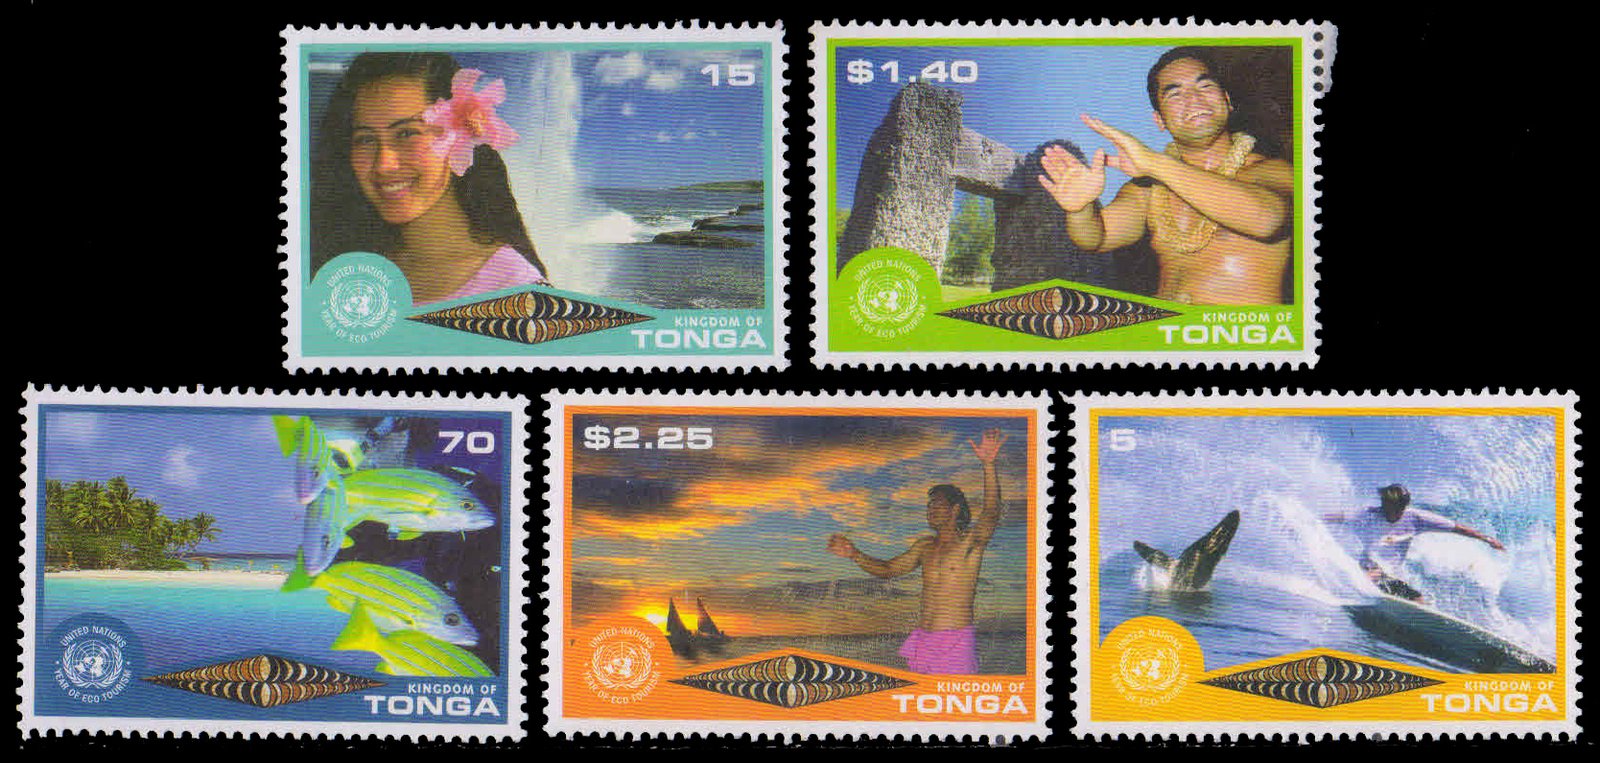 TONGA 2002-UN Year of Eco Tourism-Whale, Coastline, Fish & Beach, Dancer, Sunset, Set of 4 Stamps, MNH, S.G. 1513-1517-Cat £ 7-